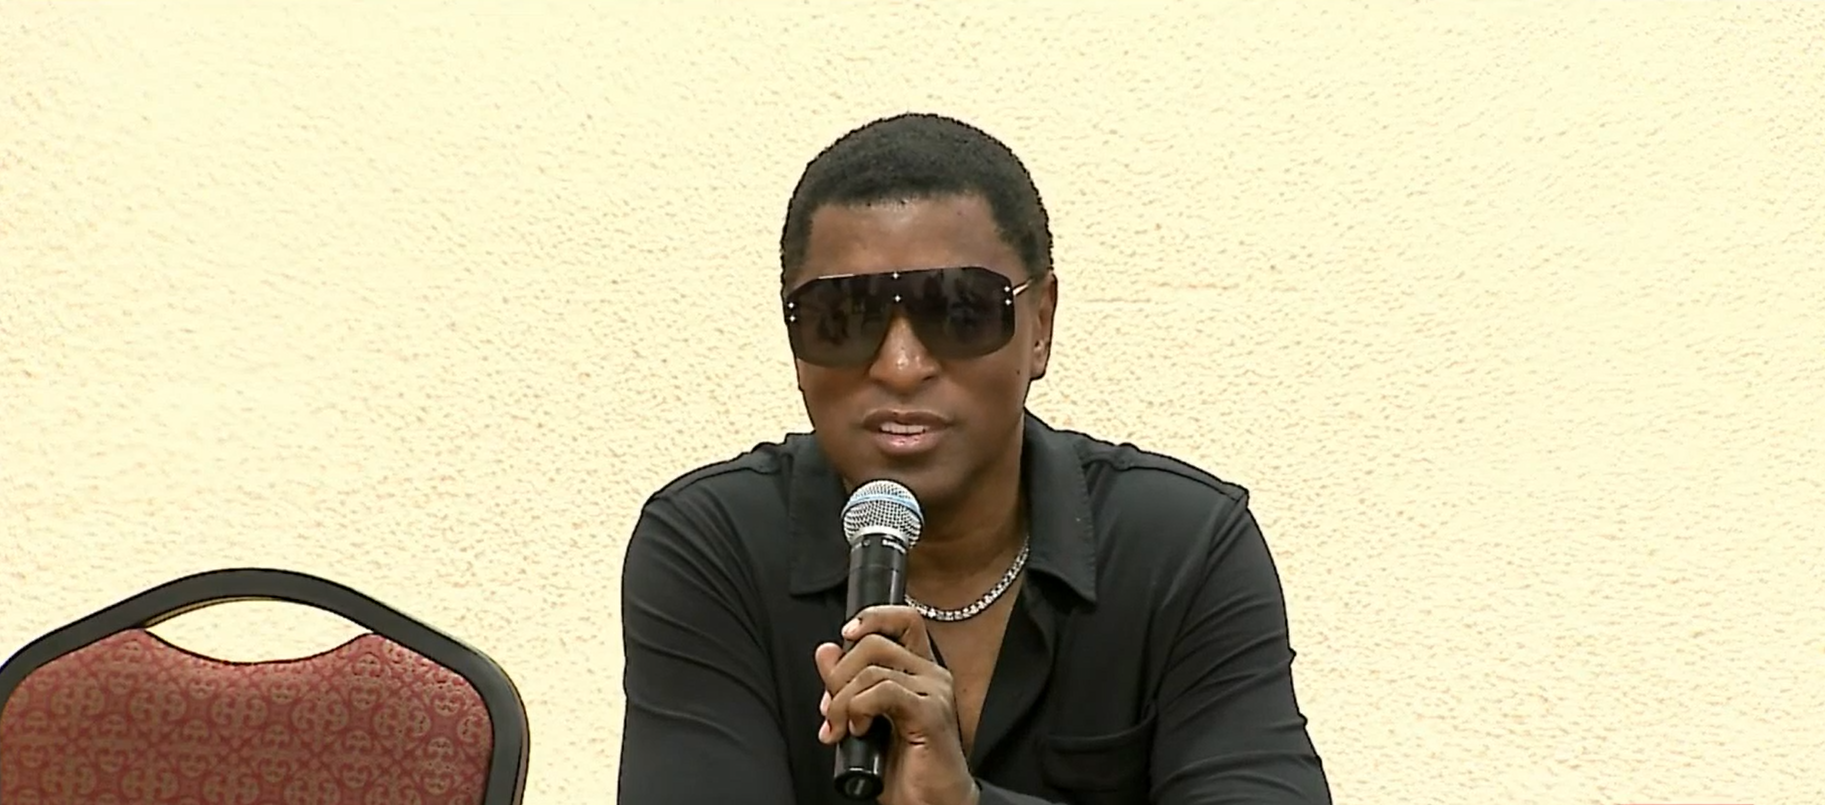 Indianapolis Native Babyface shares inspiring words ahead of concert tonight